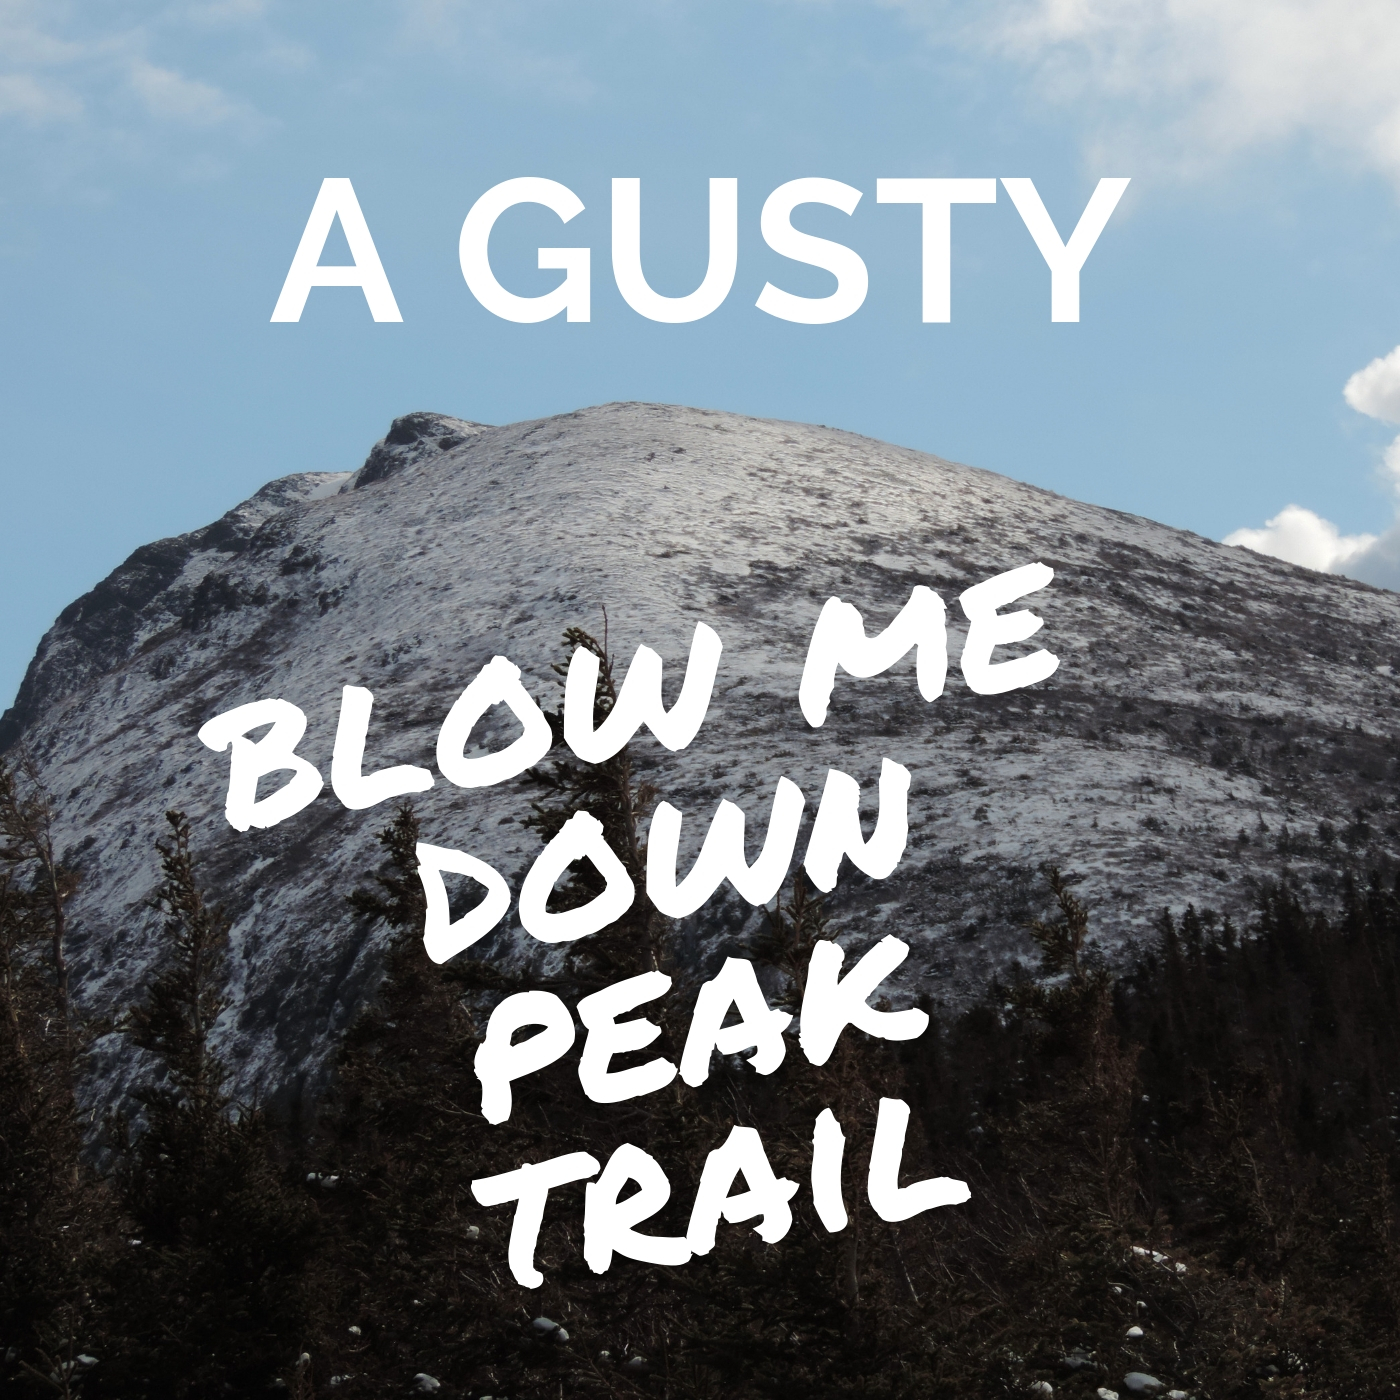 A gusty Blow Me Down Peak trail, Blow me down mountain, hiking Newfoundland, Wildly Intrepid